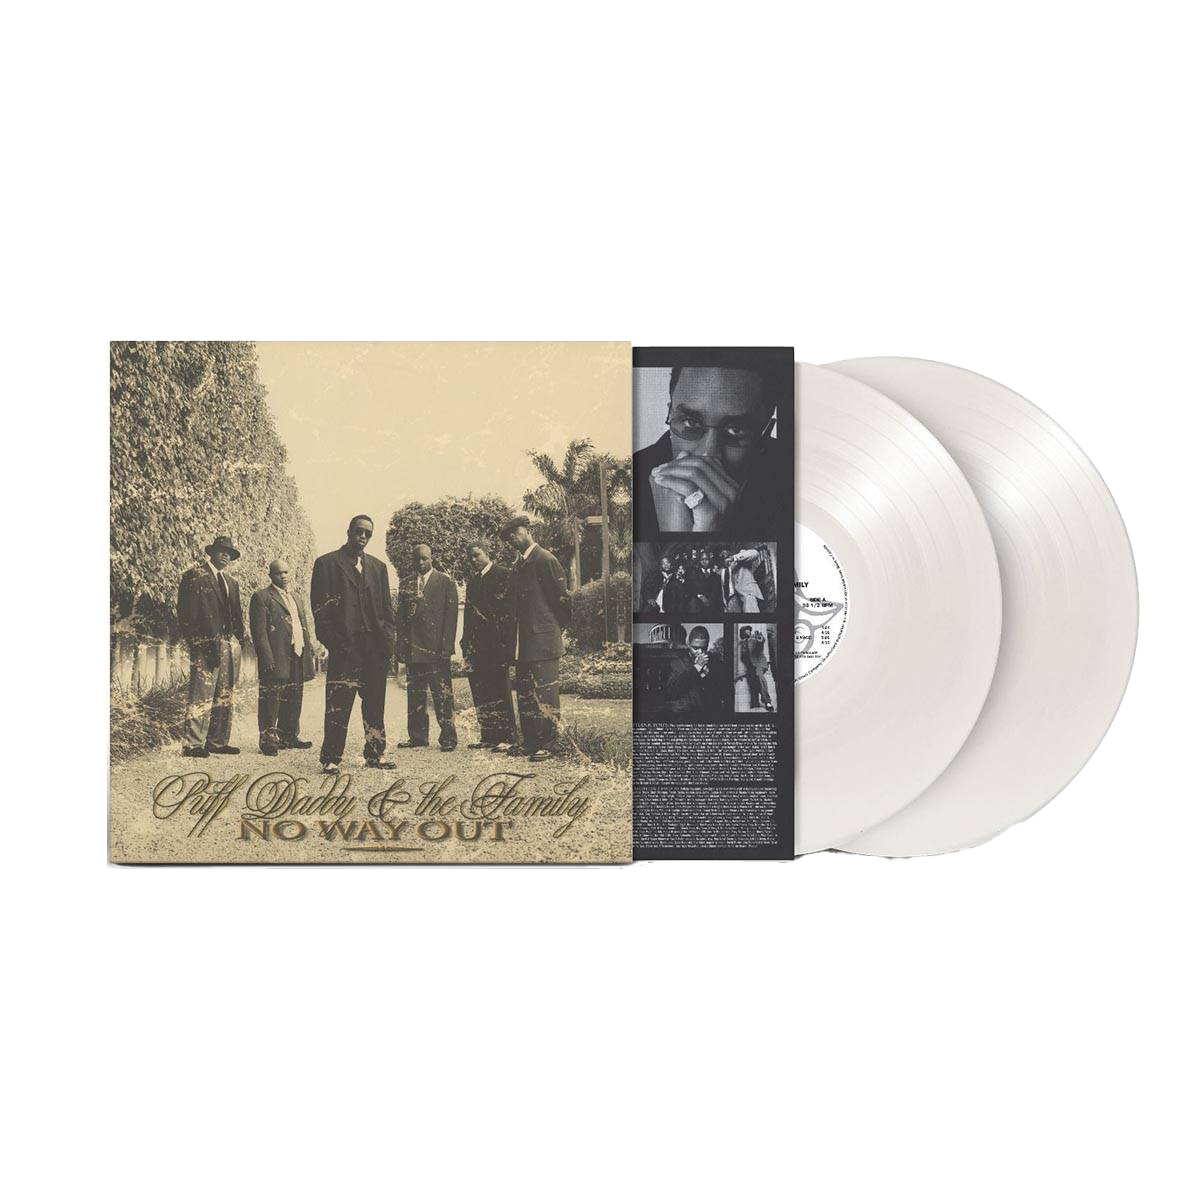 Puff Daddy and The Family - No Way Out: Limited White Vinyl 2LP